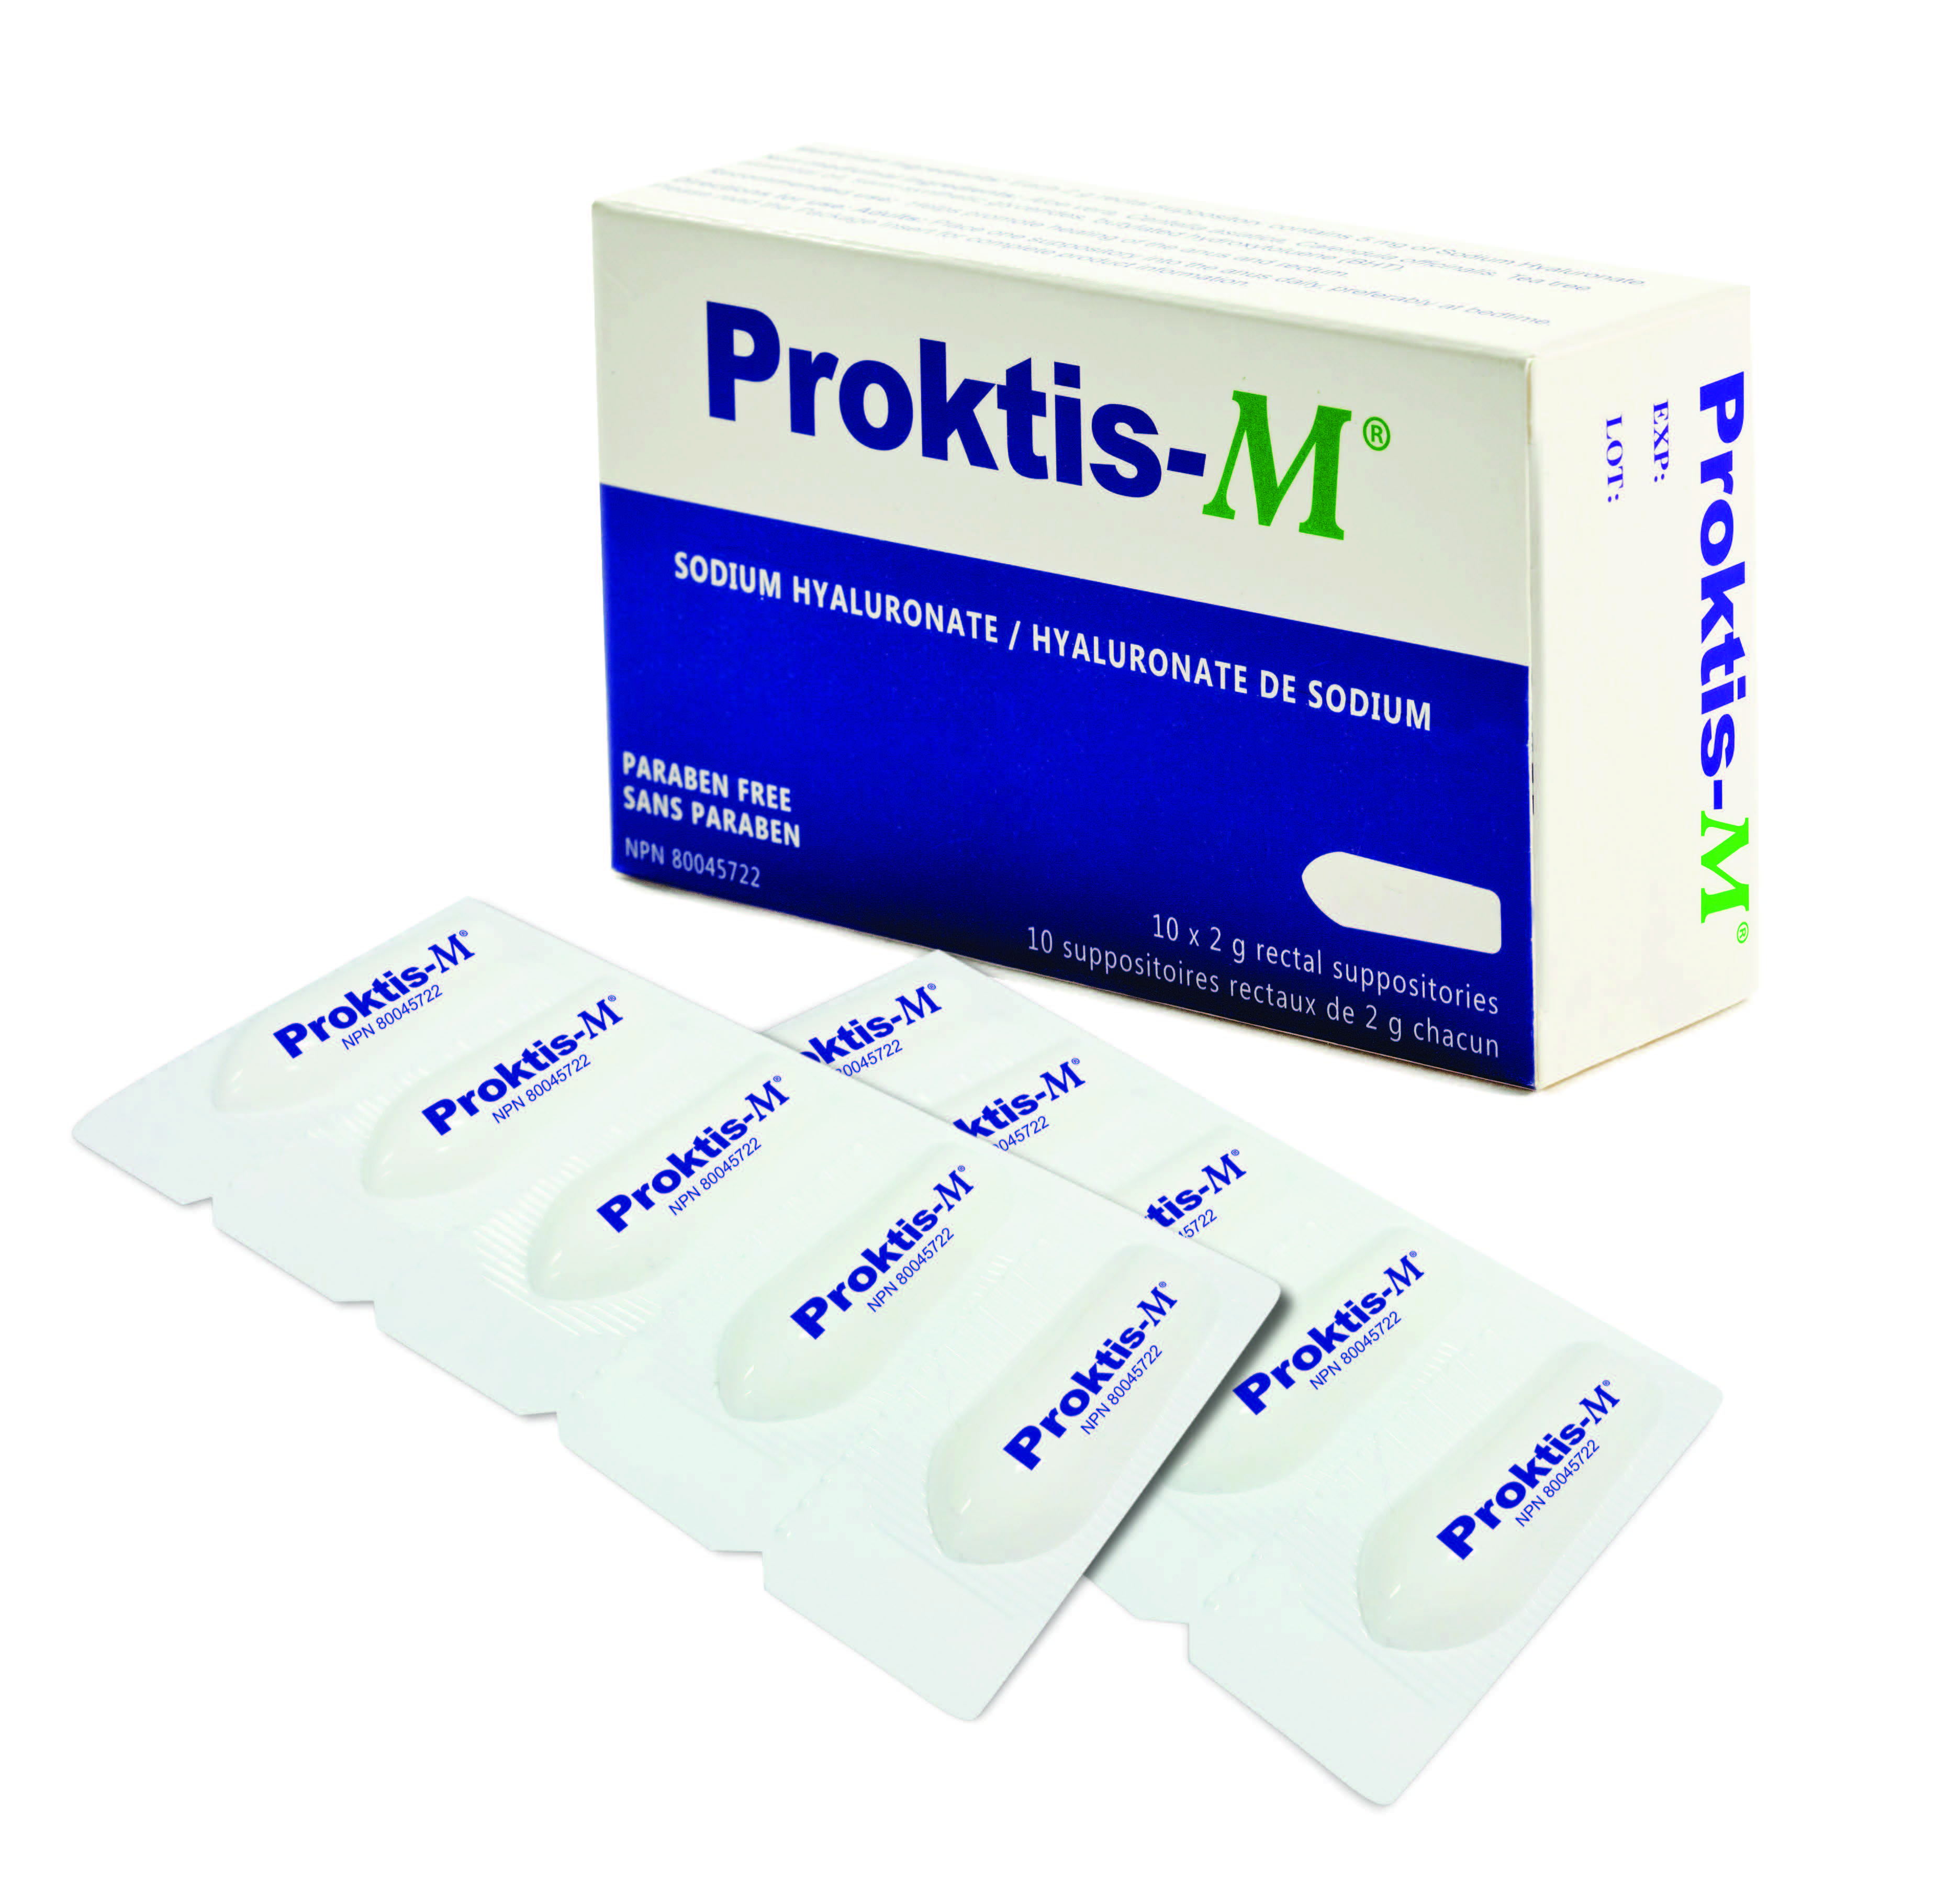 Proktis-M - For Hemorrhoids and Anal Fissures - Pharmex Direct - Mailing and Online Pharmacy